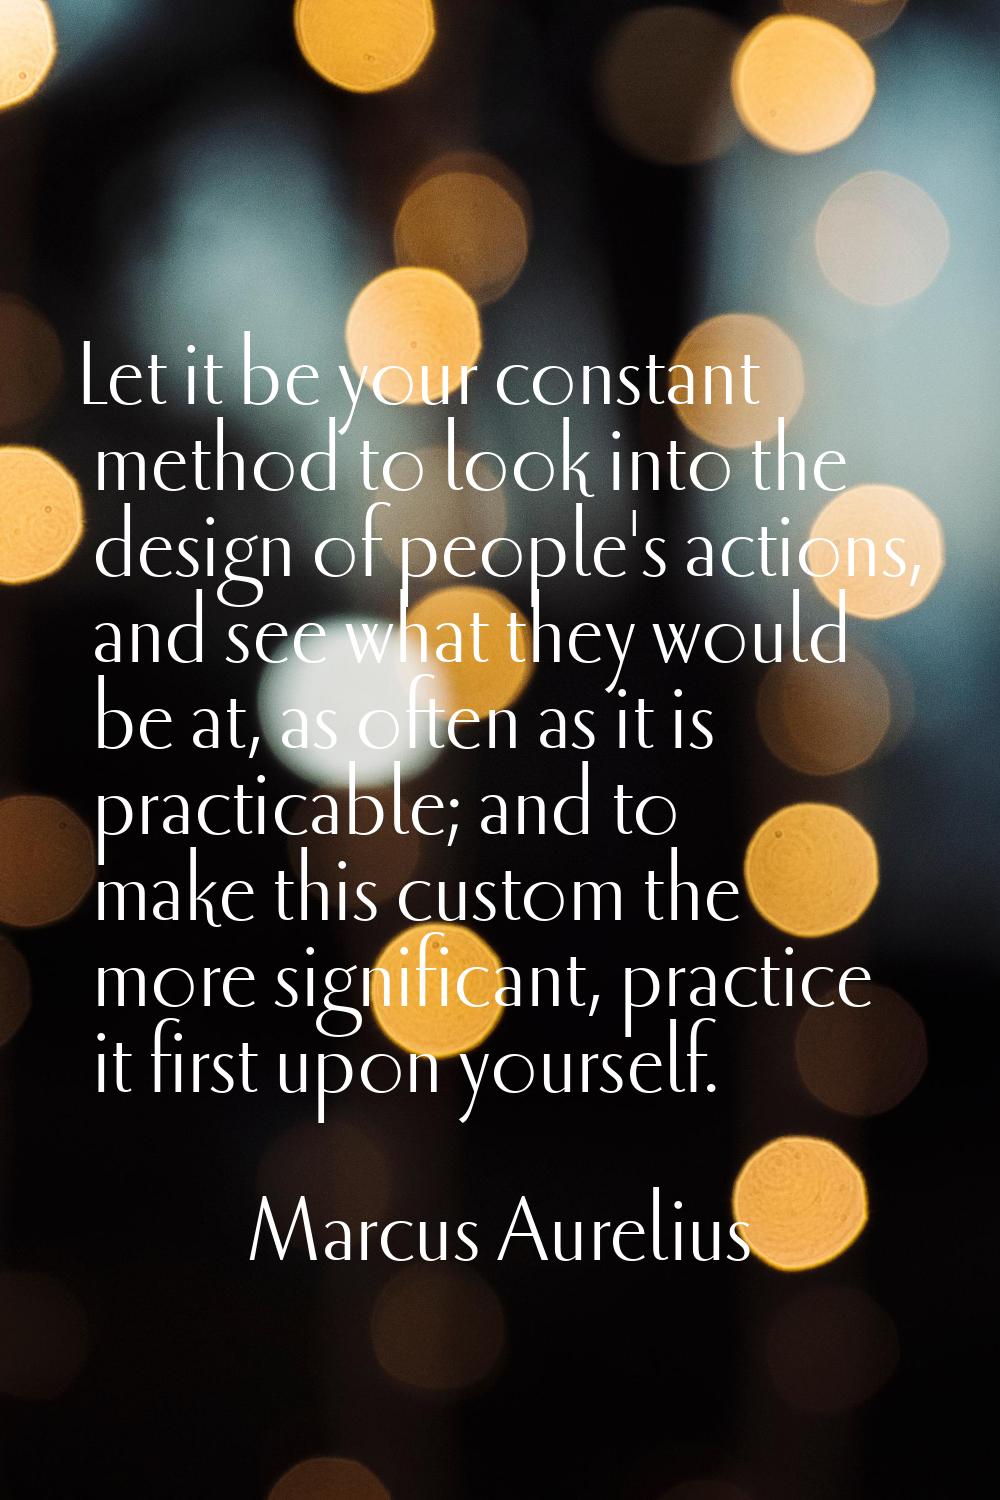 Let it be your constant method to look into the design of people's actions, and see what they would